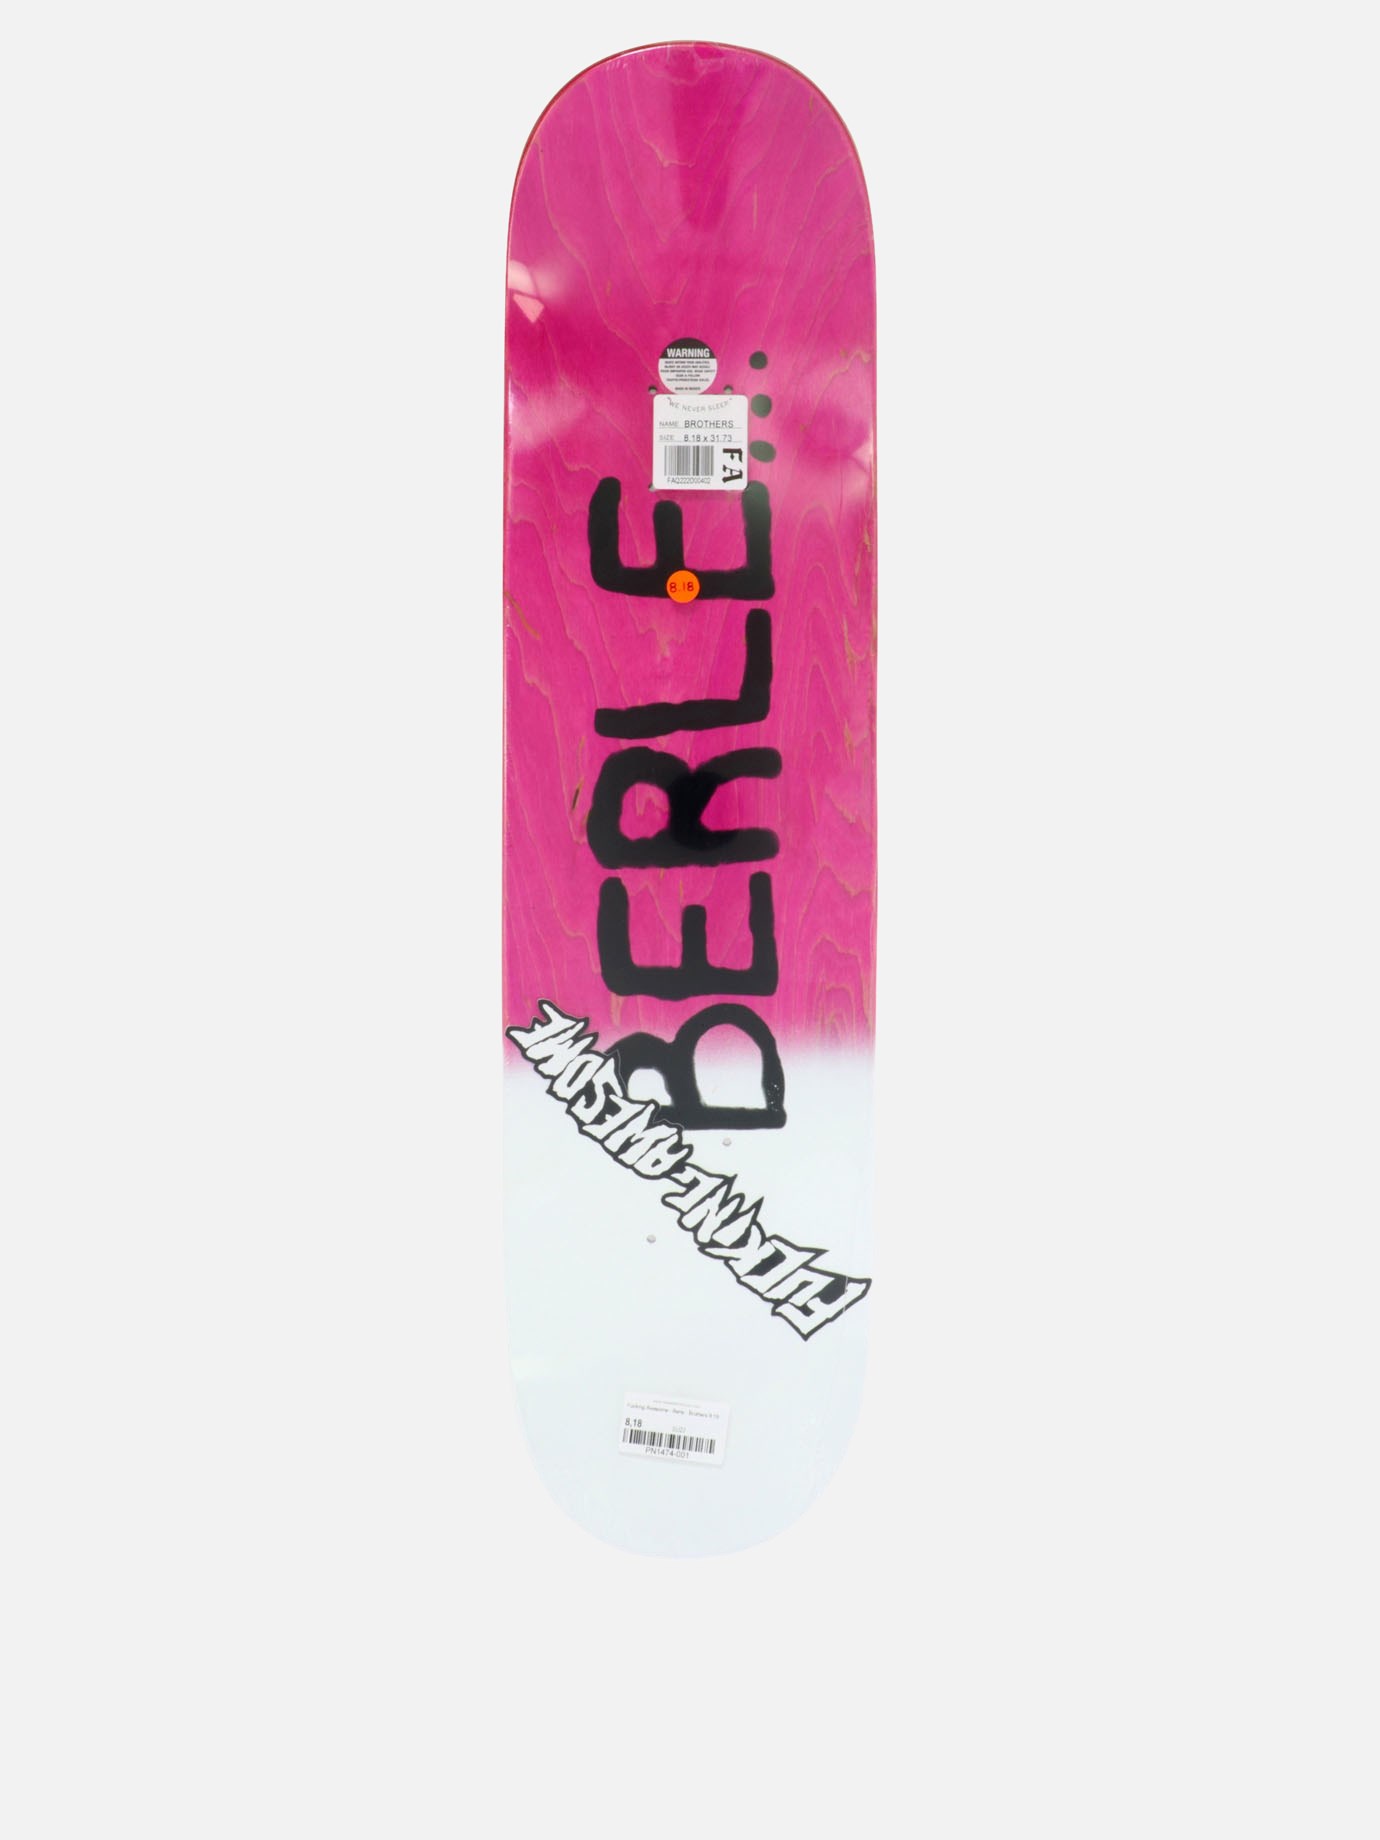  Berle Brothers  skateboardby Fucking Awesome - 2